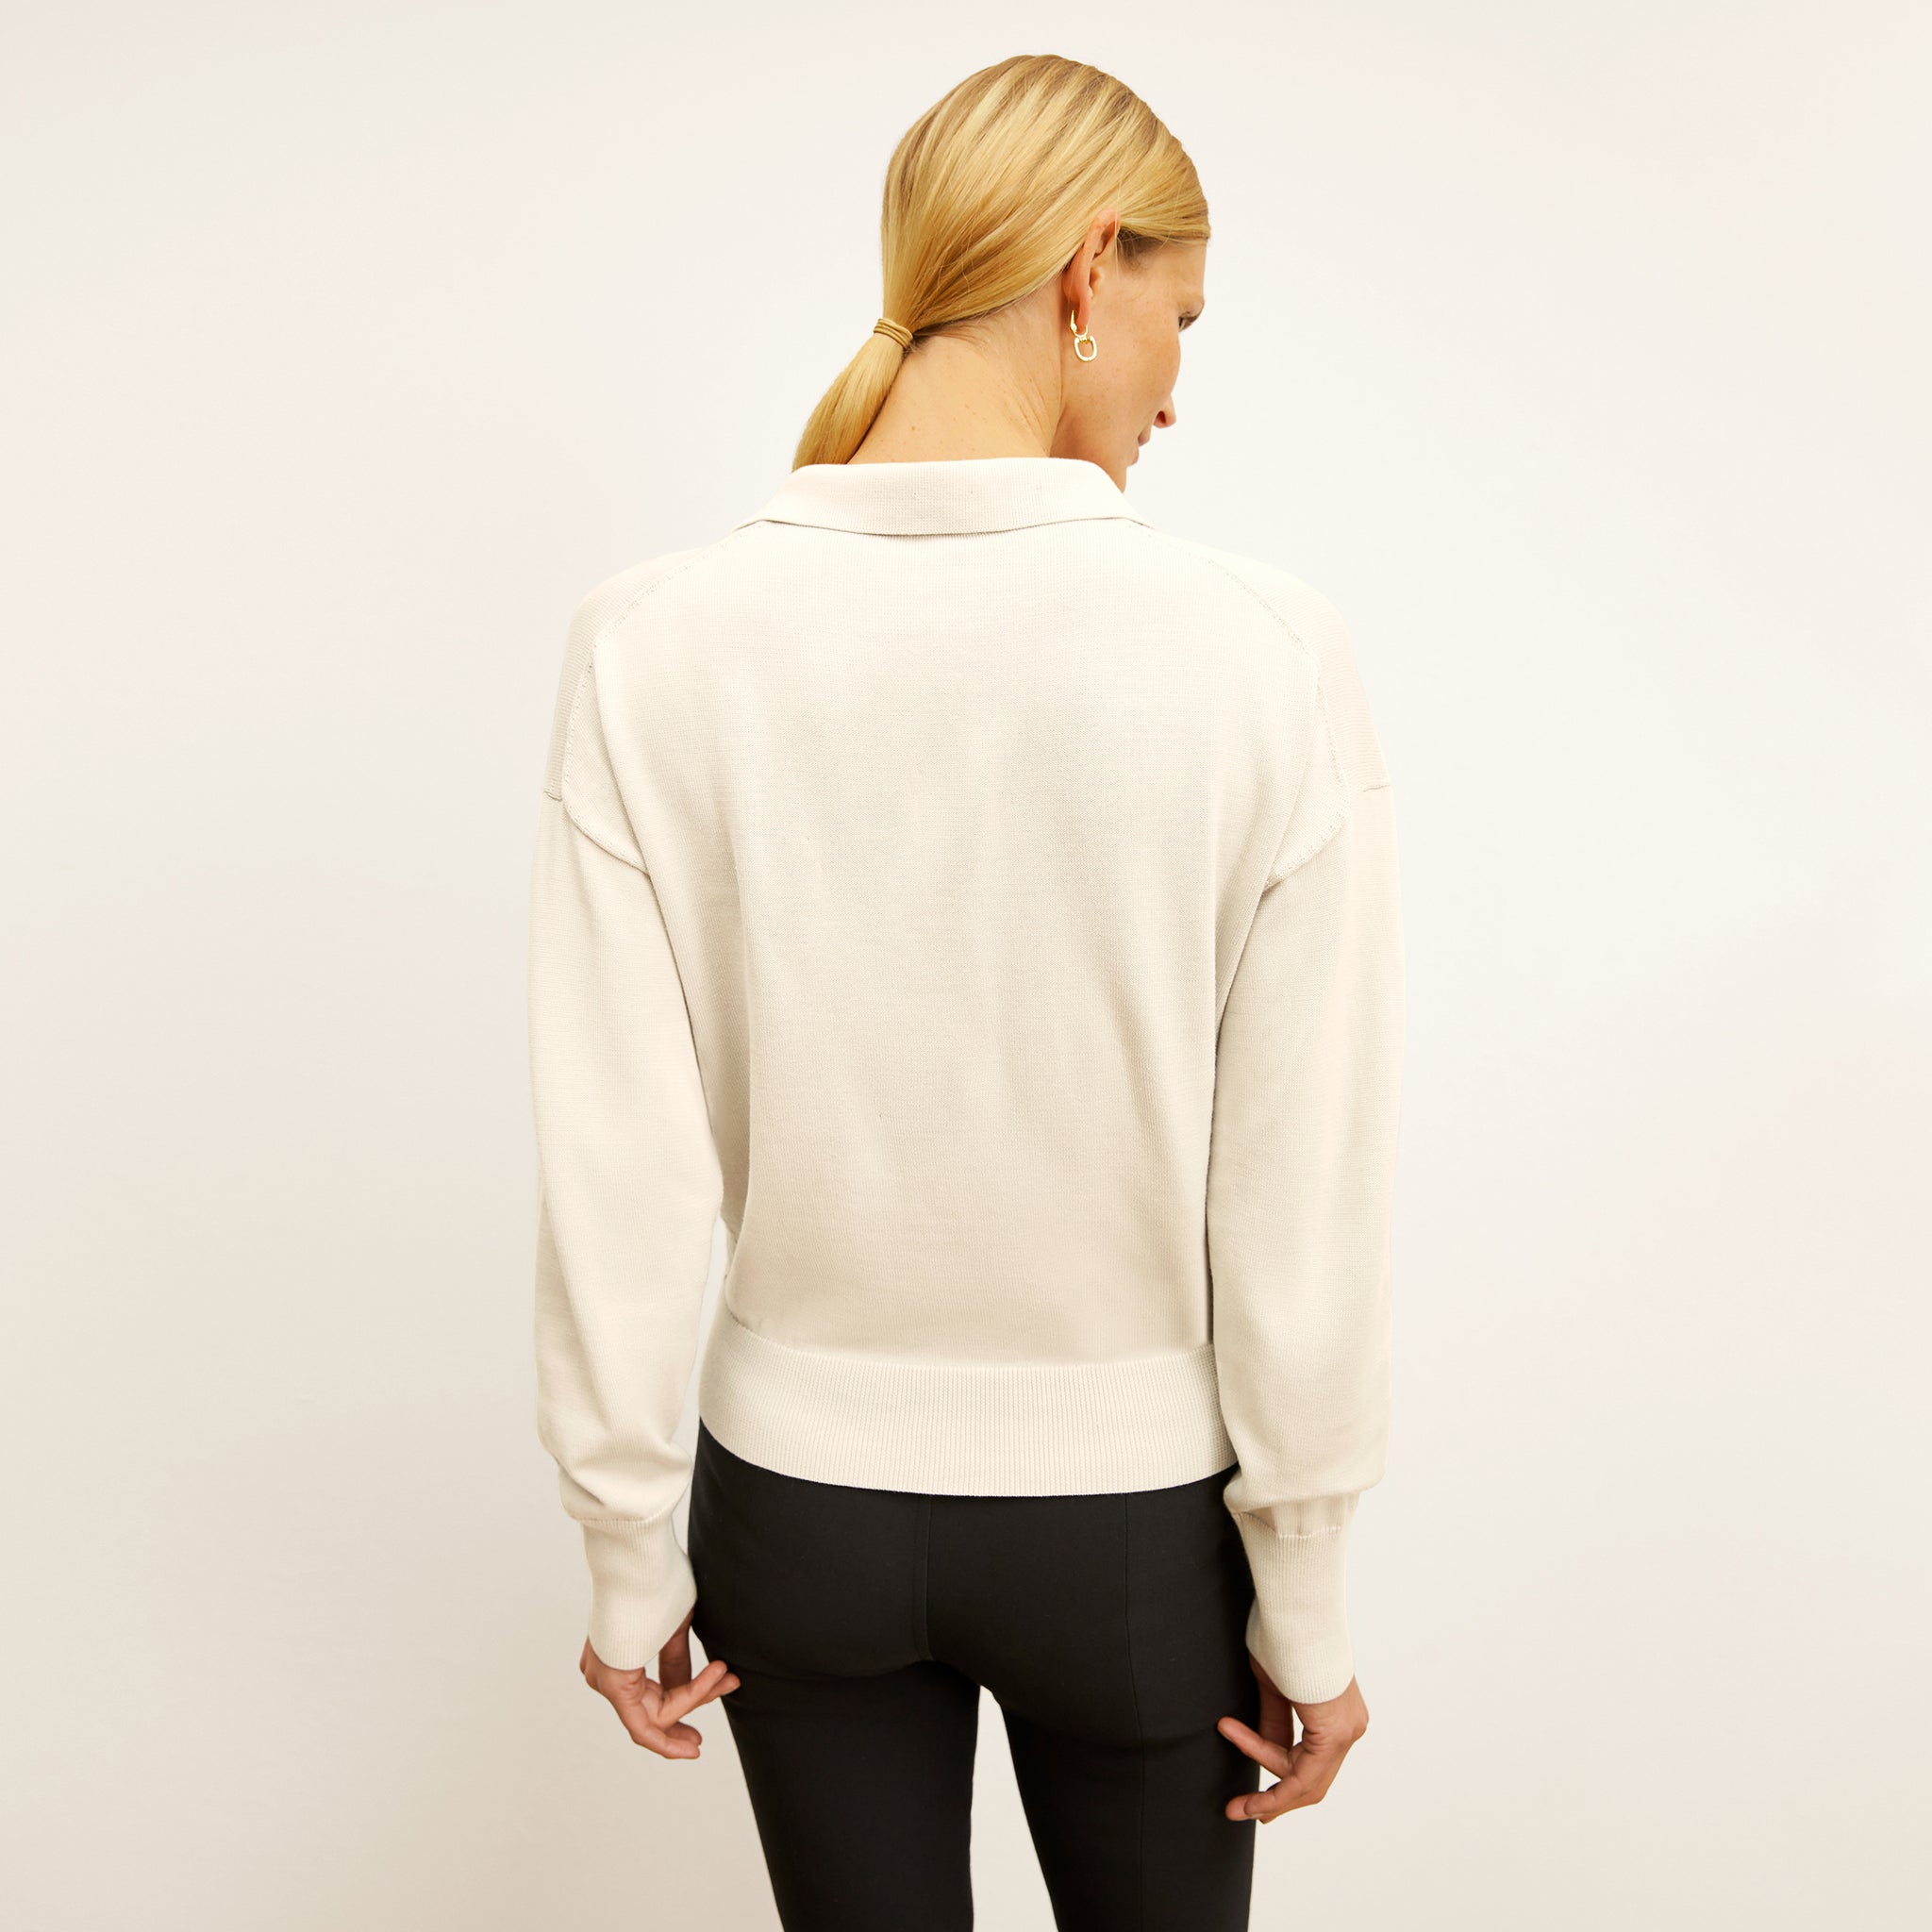 Bacl image of a woman wearing the Leo Pullover